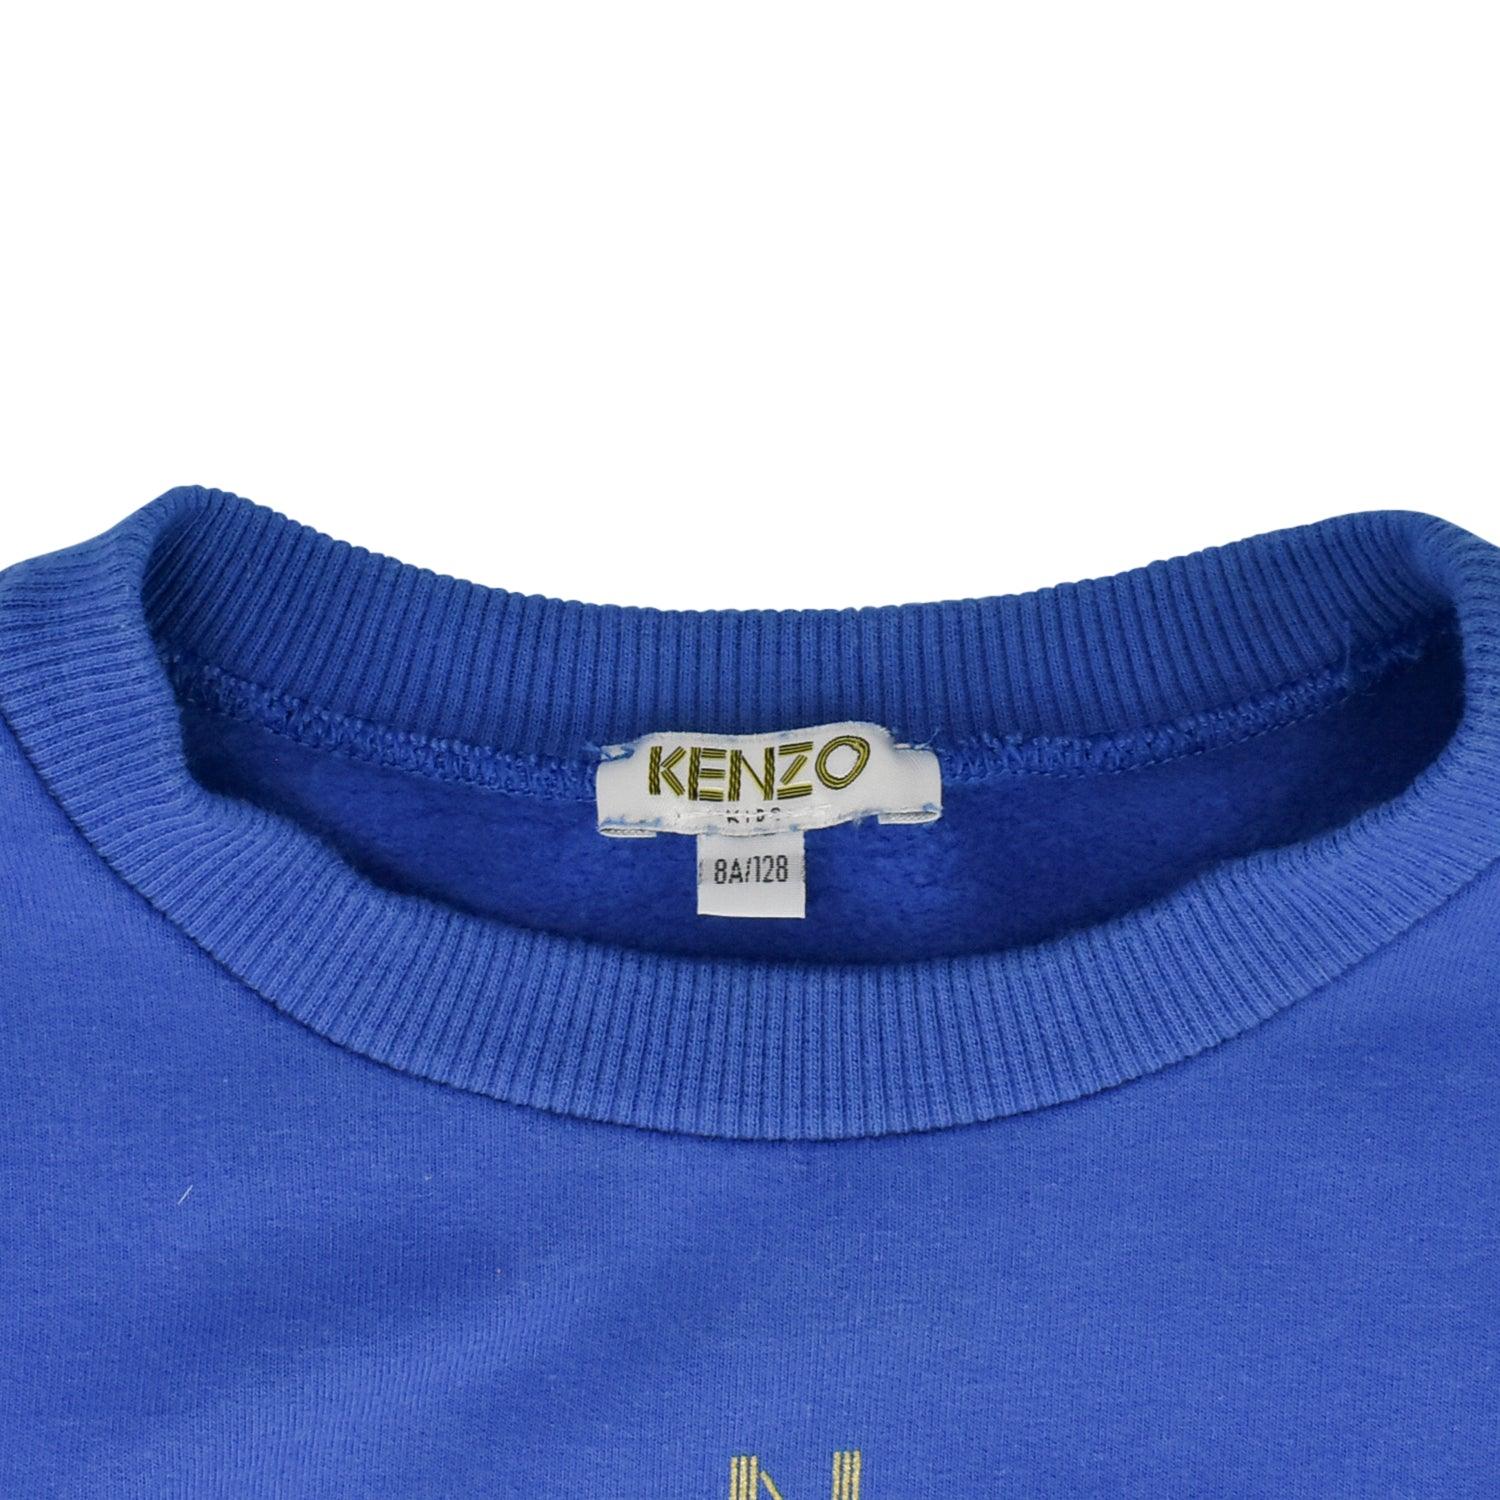 Kenzo Crewneck - Youth's 8Y - Fashionably Yours